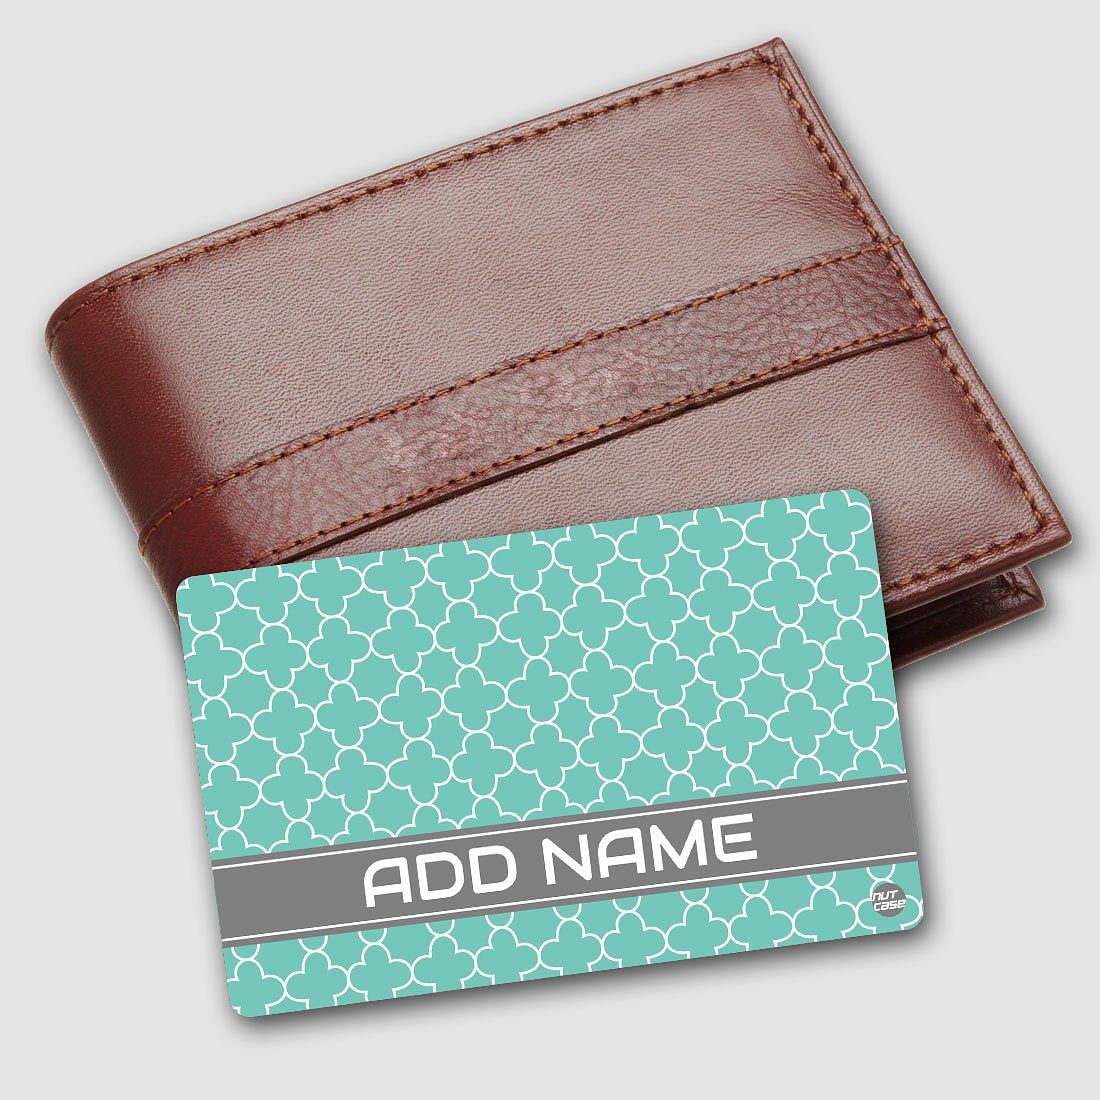 Customized Digital Business NFC Cards - Mint Blue Patter Nutcase